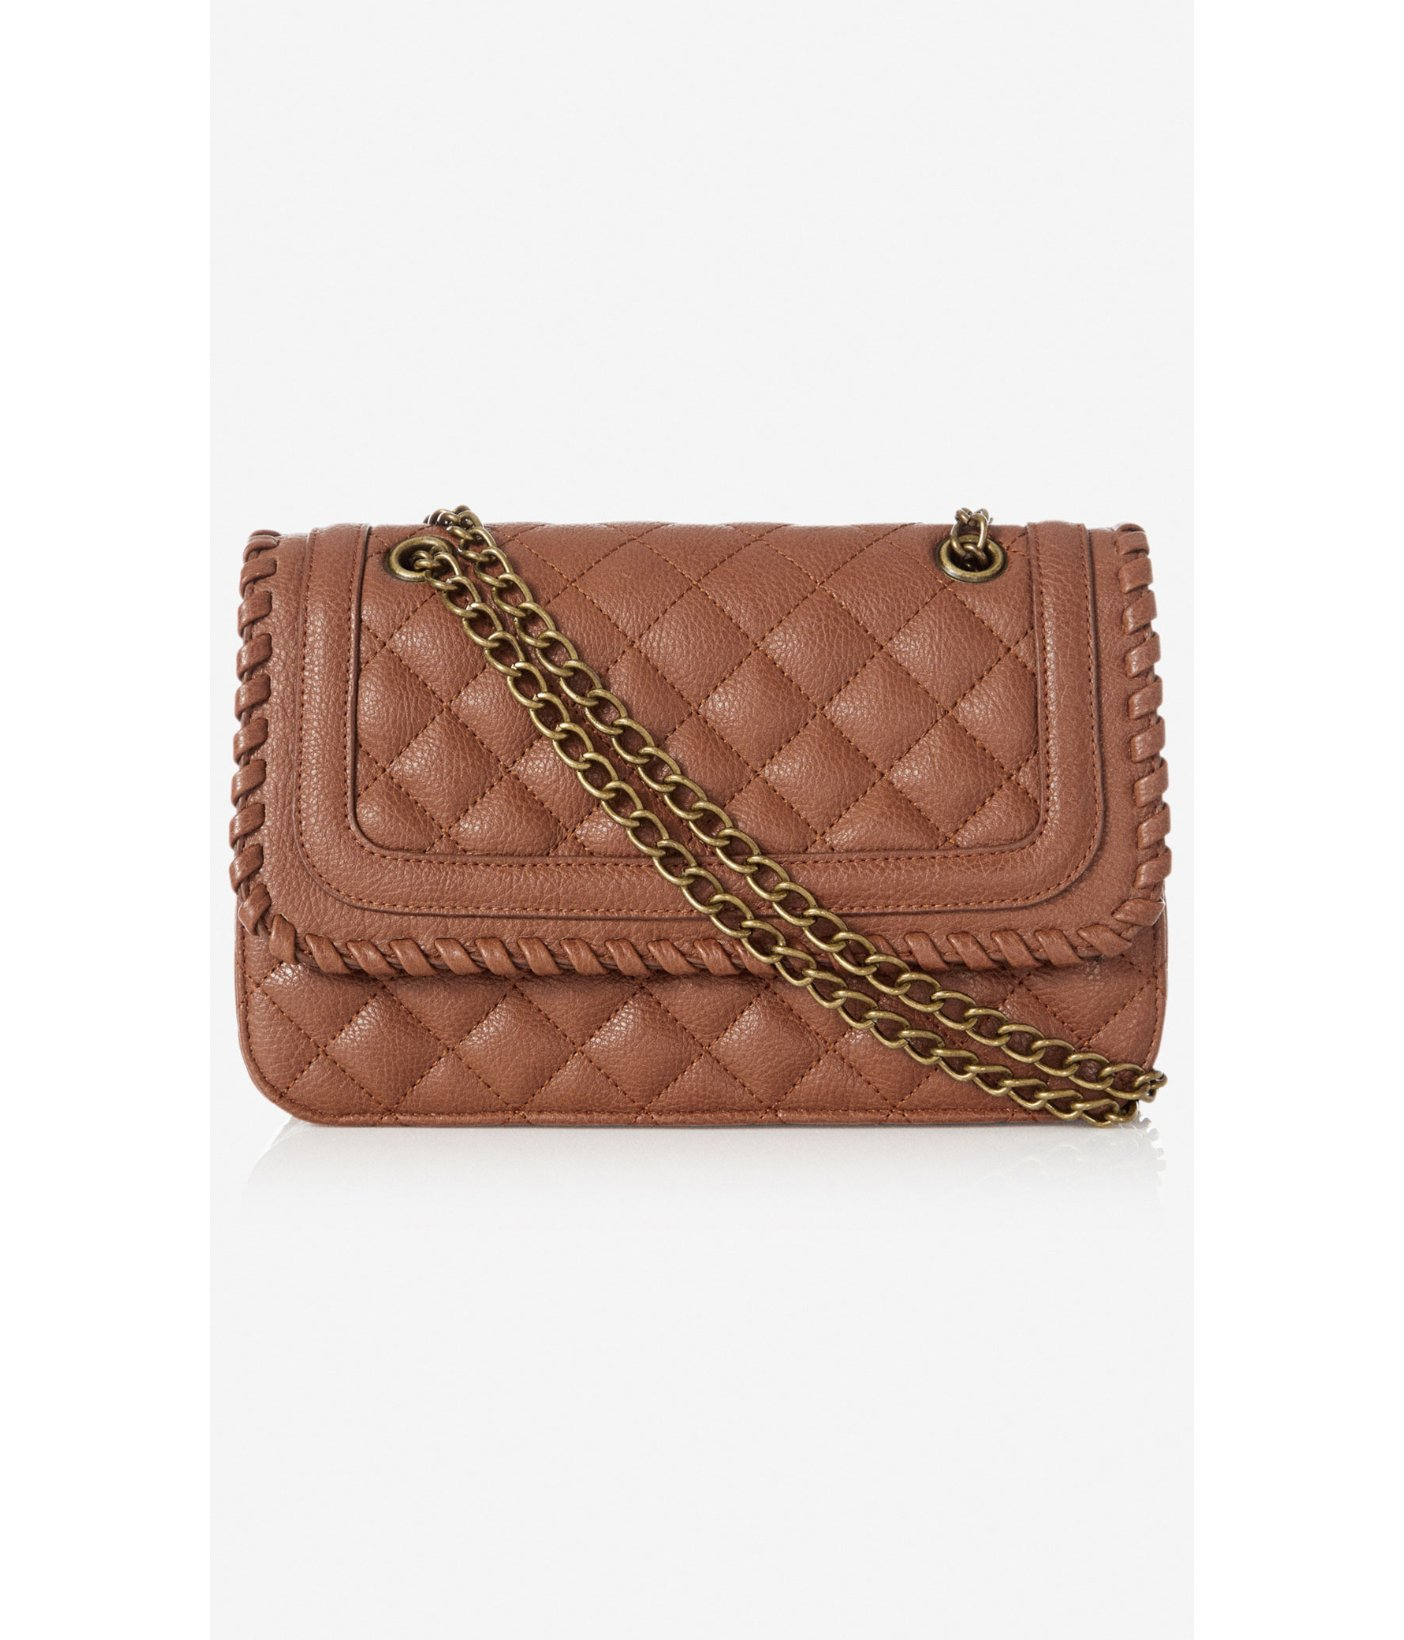 Express Whipstitch Quilted Chain Strap Shoulder Bag in Brown - Lyst